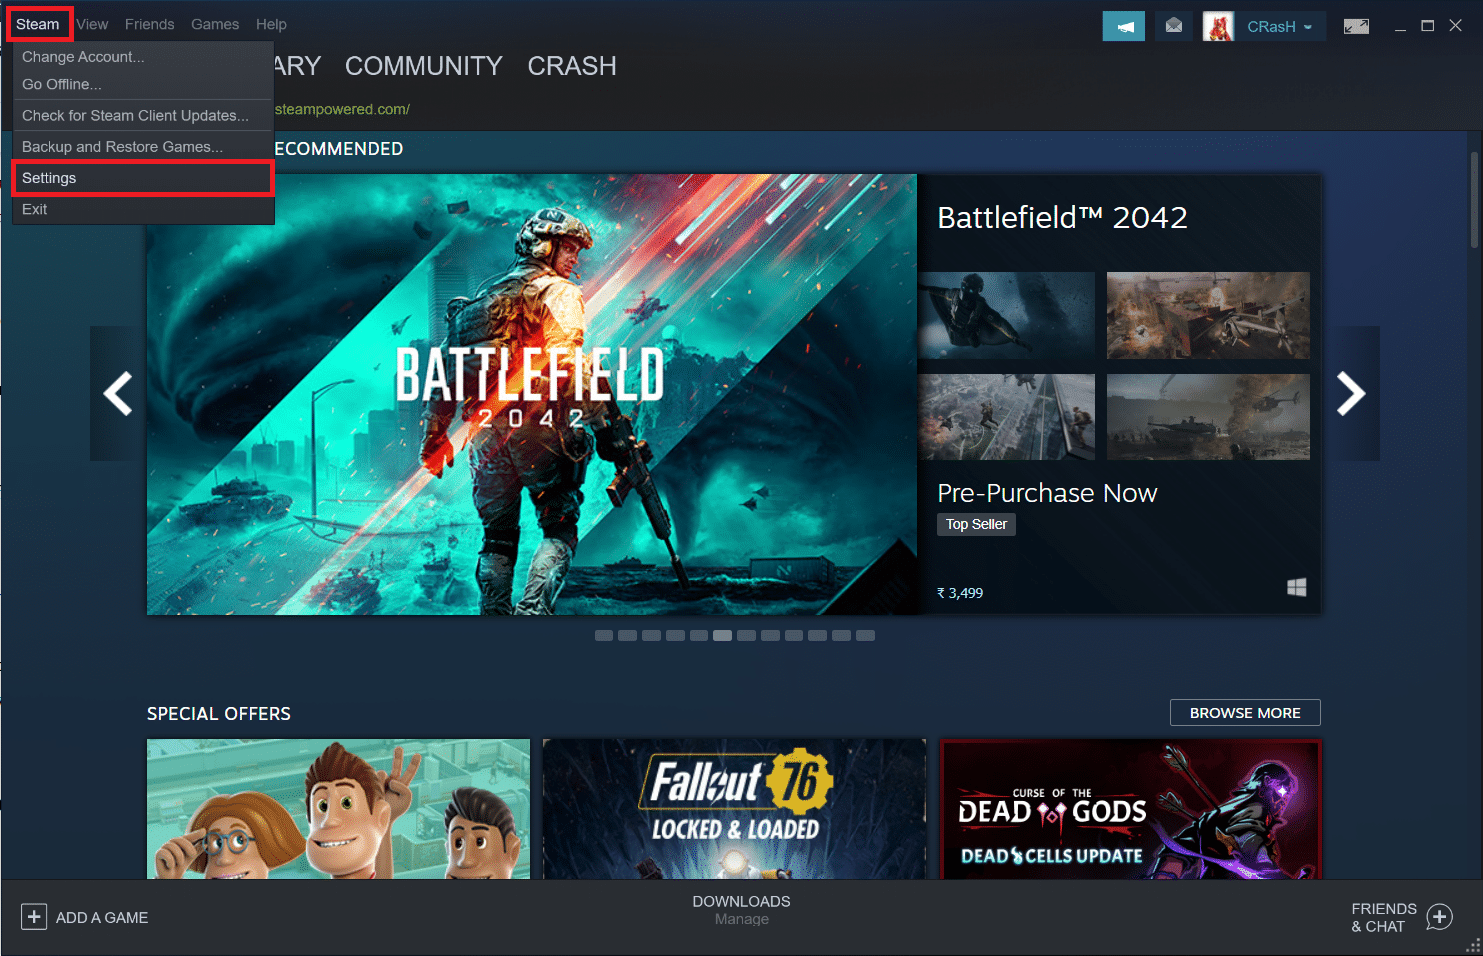 Click on Steam at the top left corner and click Settings from the drop down menu.